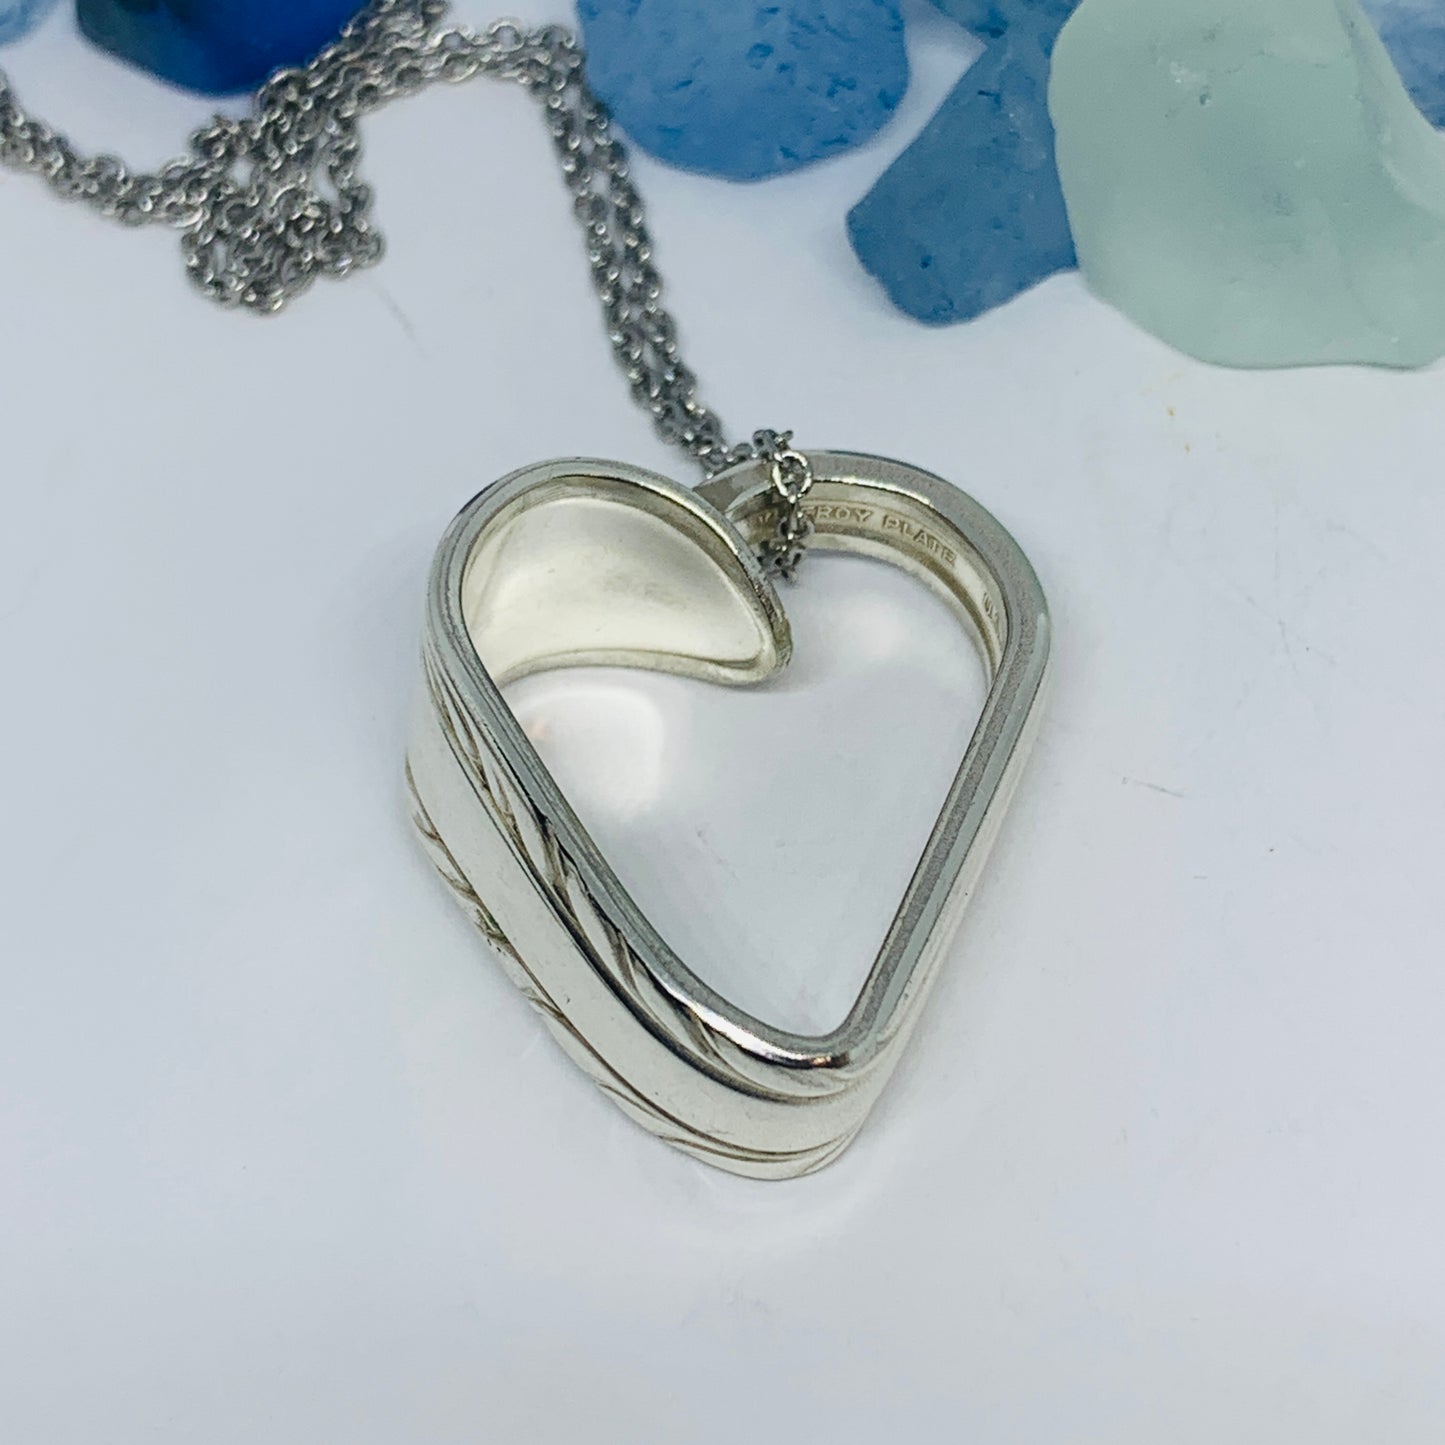 Hearts made from Vintage Silverware | Bent Spoon Fork | Heart-Shaped Pendant Necklace Keychain Key Ring | Silverware Jewelry | Love | Valentine's Day Gift